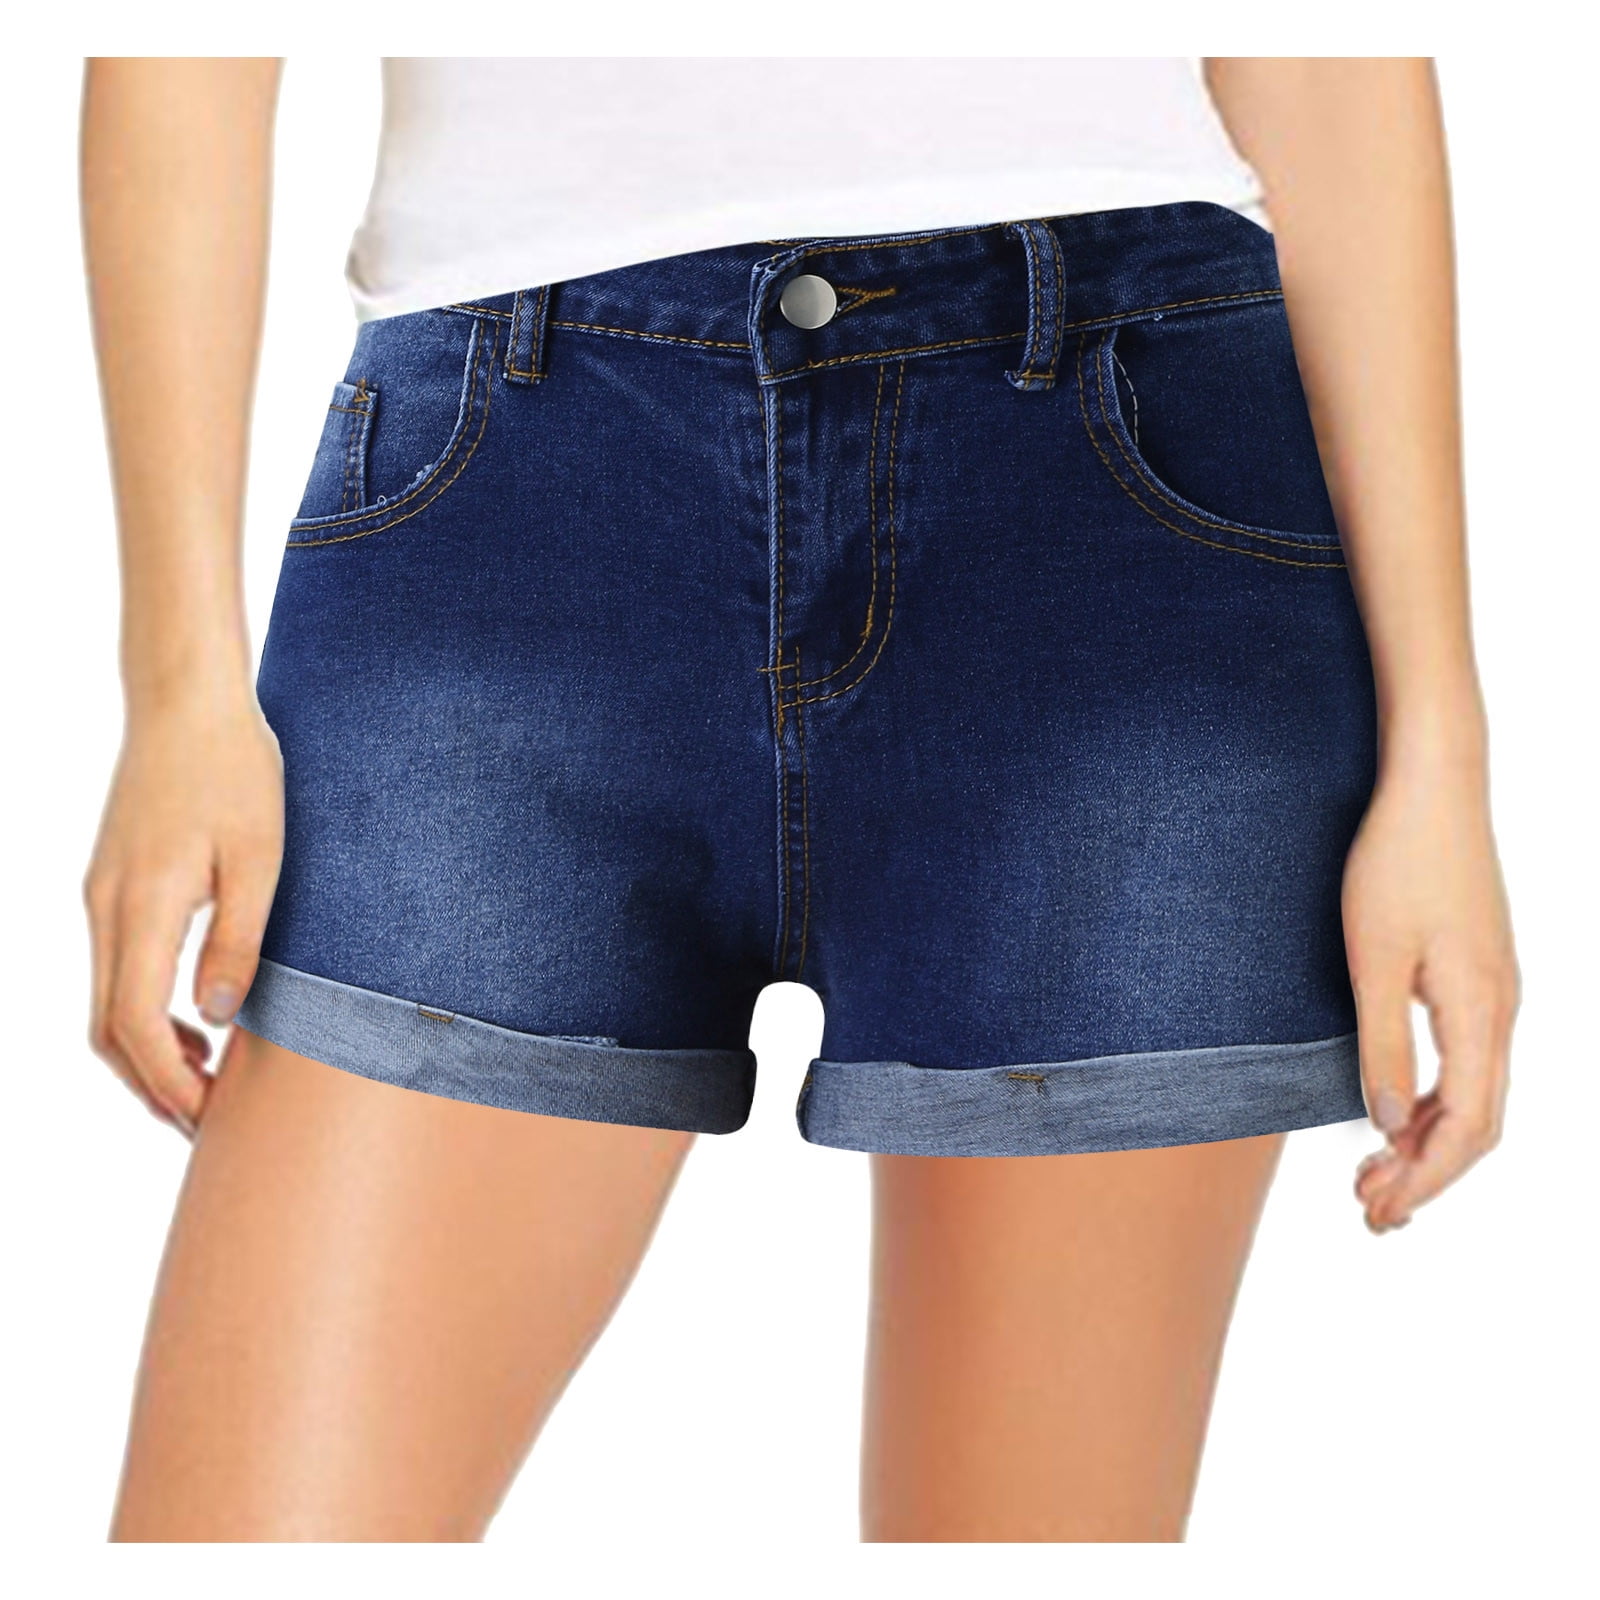 Cathalem Stretch Jean Shorts for Women Plus Size Women Stretchy Jeans ...